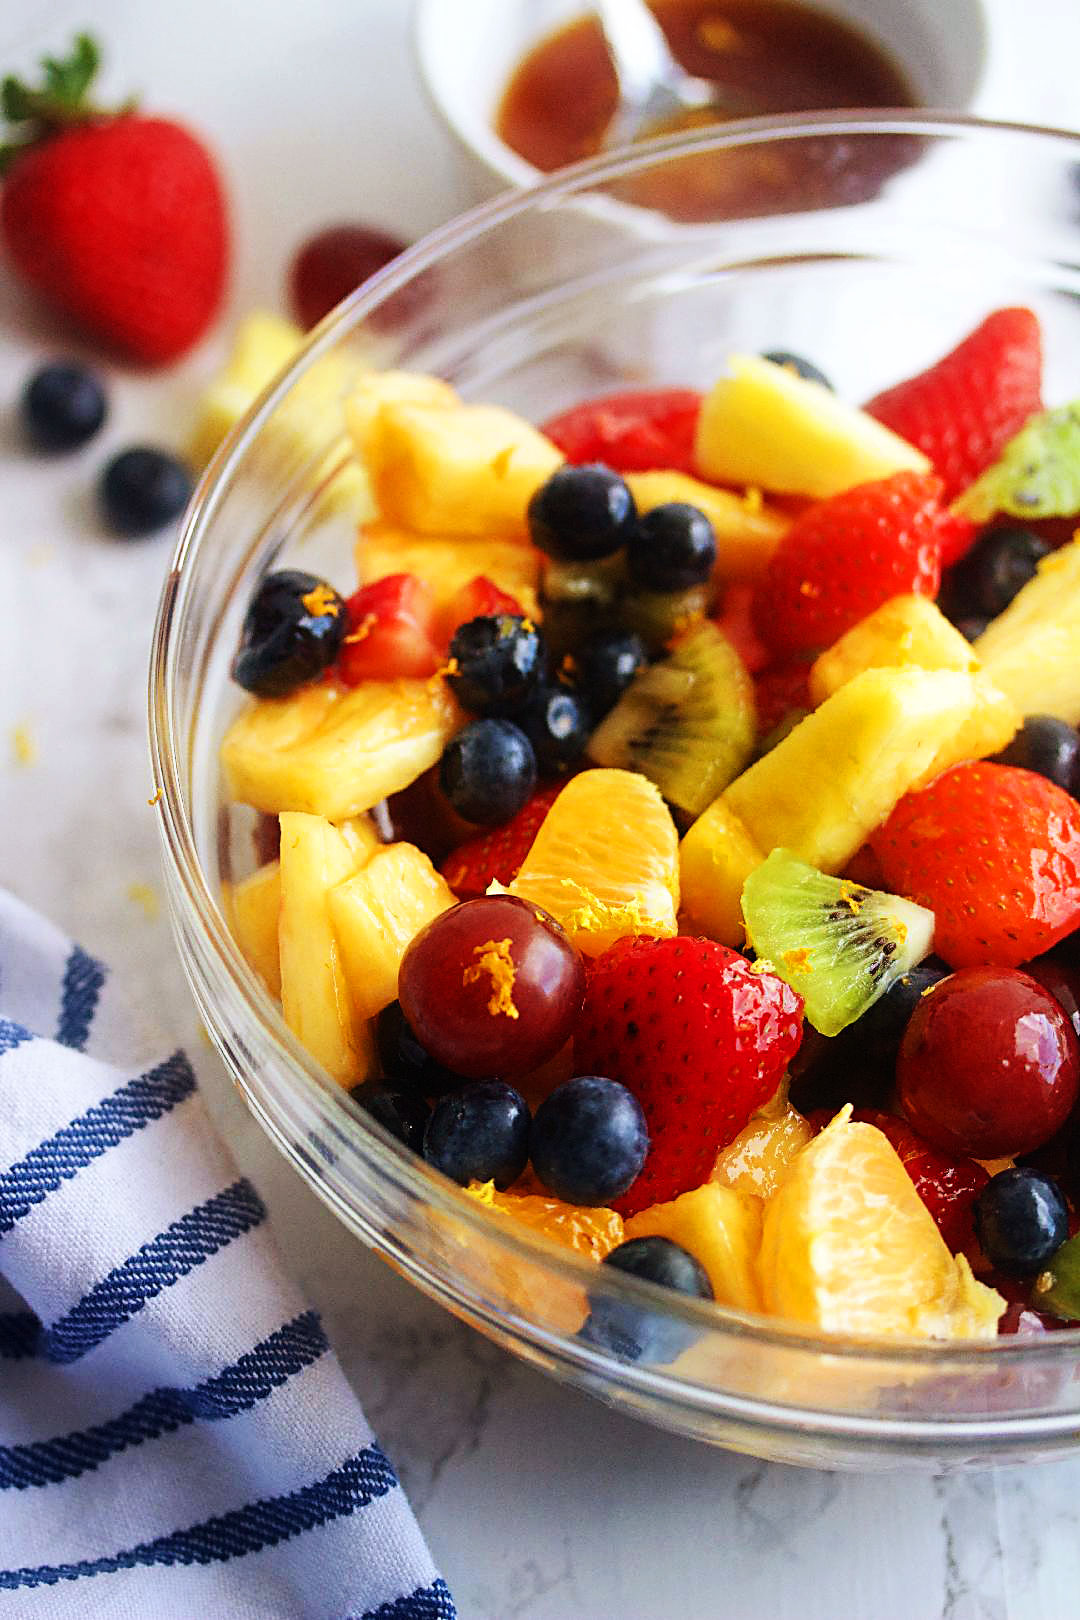 Summer Fruit Salad is a refreshing, colorful fruit salad with a slightly sweet and tangy dressing. Life-in-the-Lofthouse.com